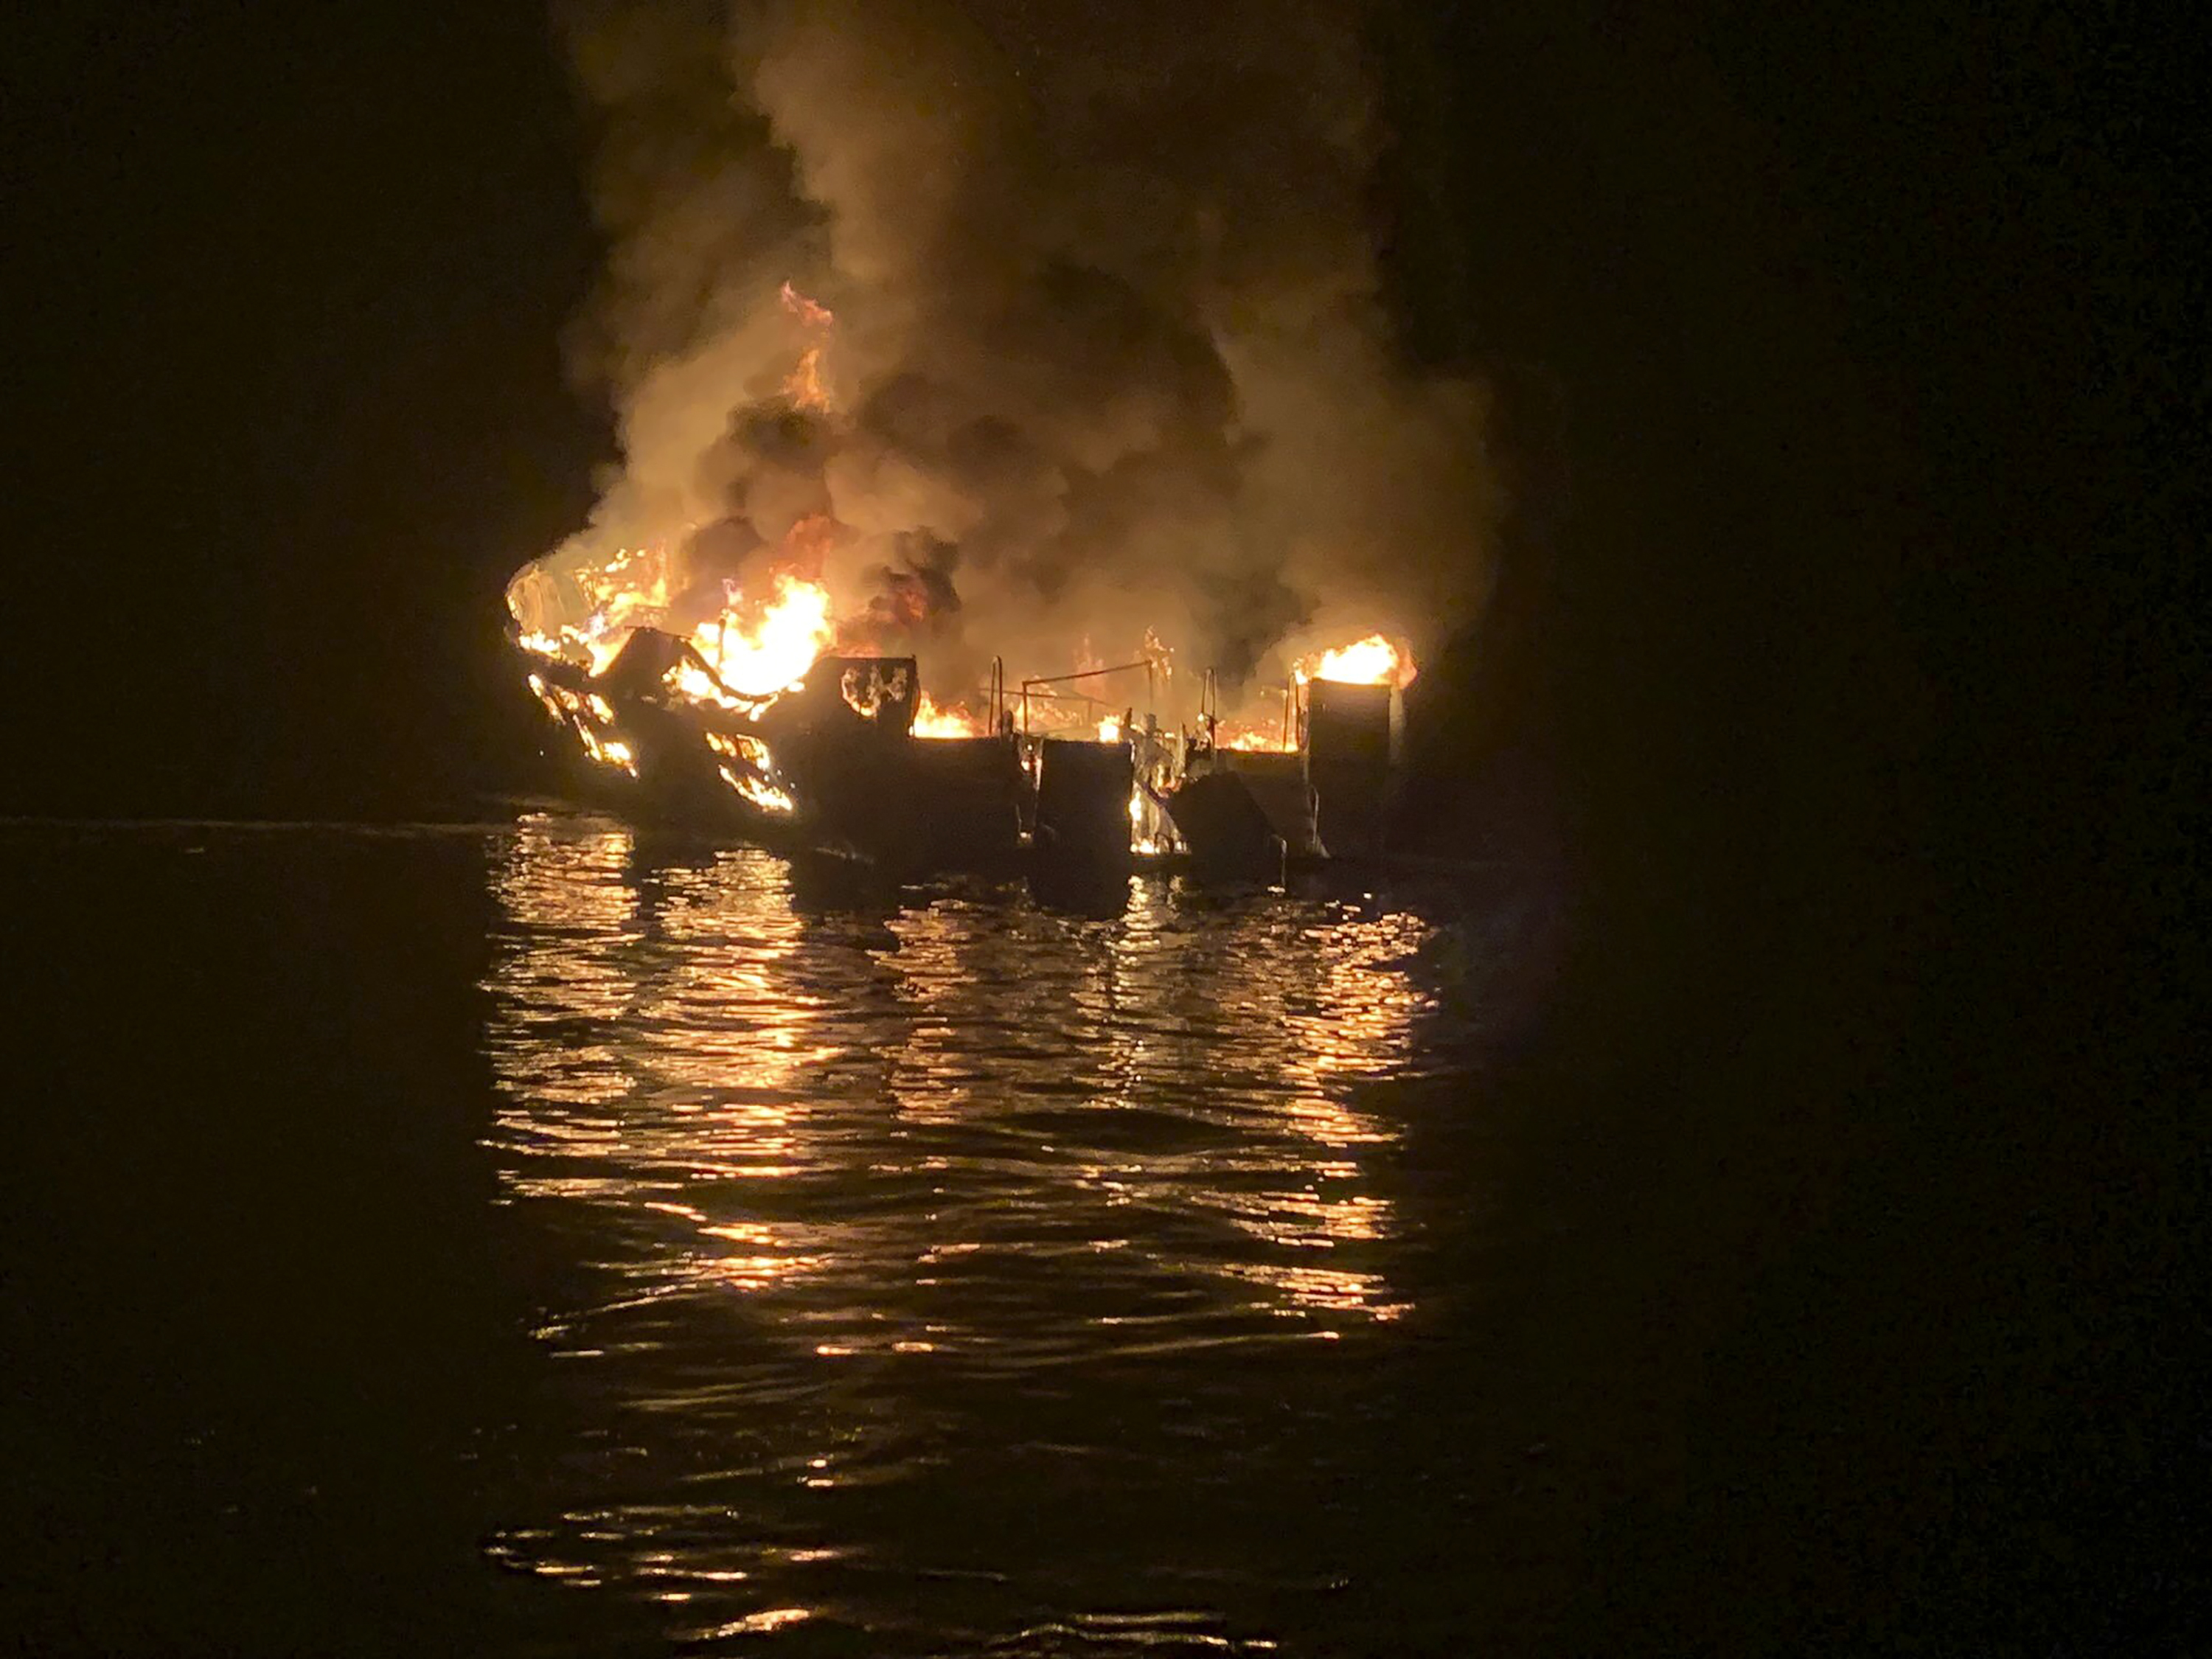  High-stakes legal battle looms in California boat fire that killed 34